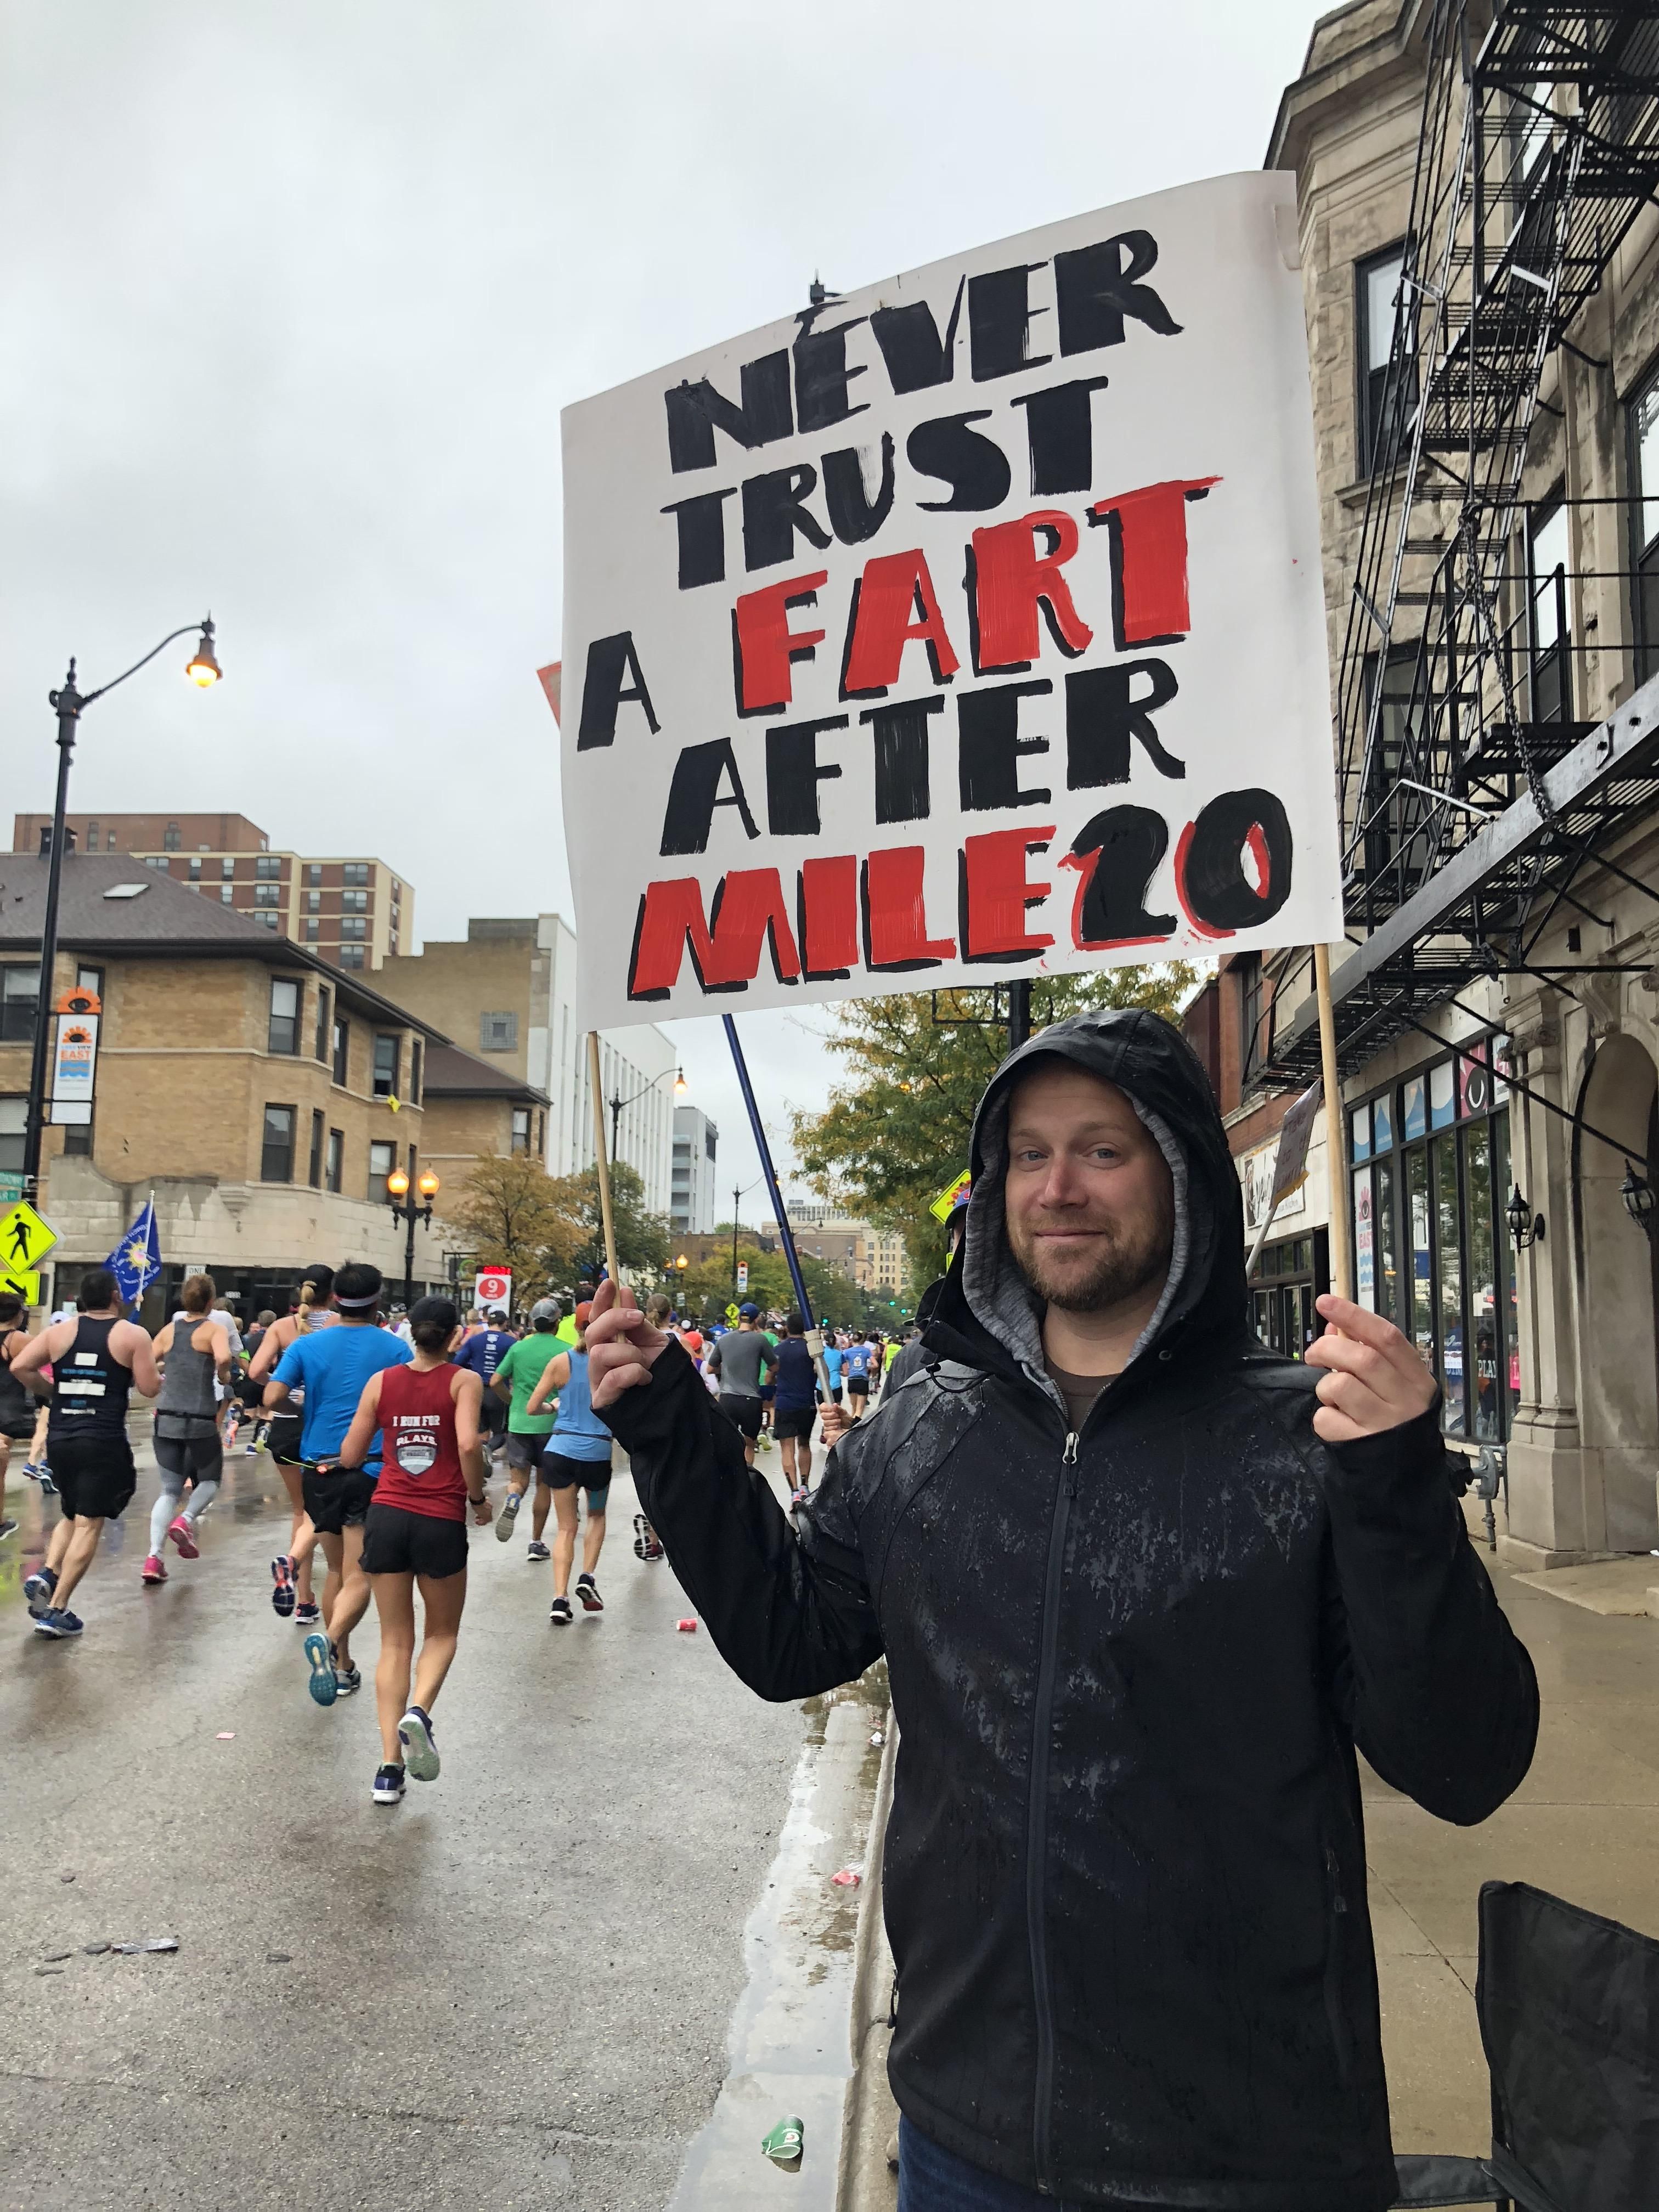 Not an original idea. But I still made lots of strangers laugh today at the Chicago Marathon.